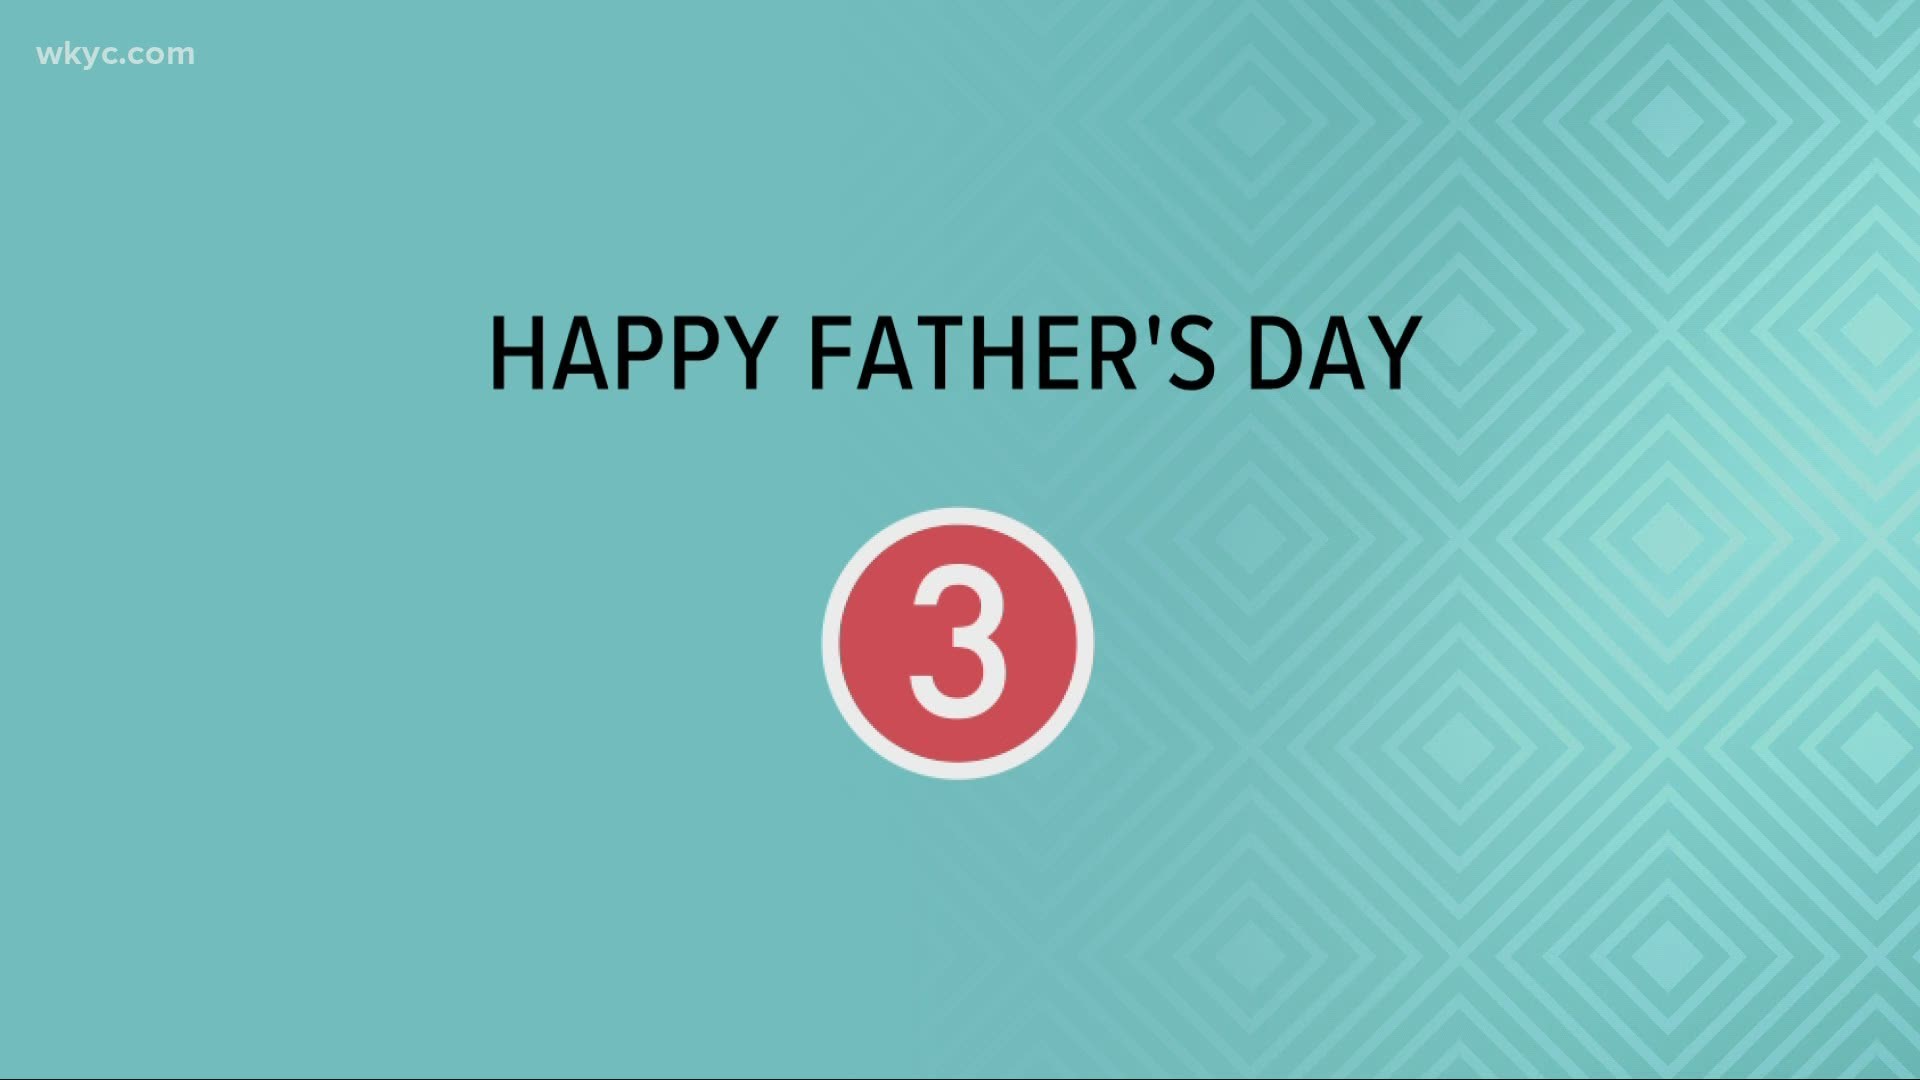 Father's Day is more than just a day for golfing and barbecues.  It's also an opportunity to reflect on the responsibility that comes along with being a parent.